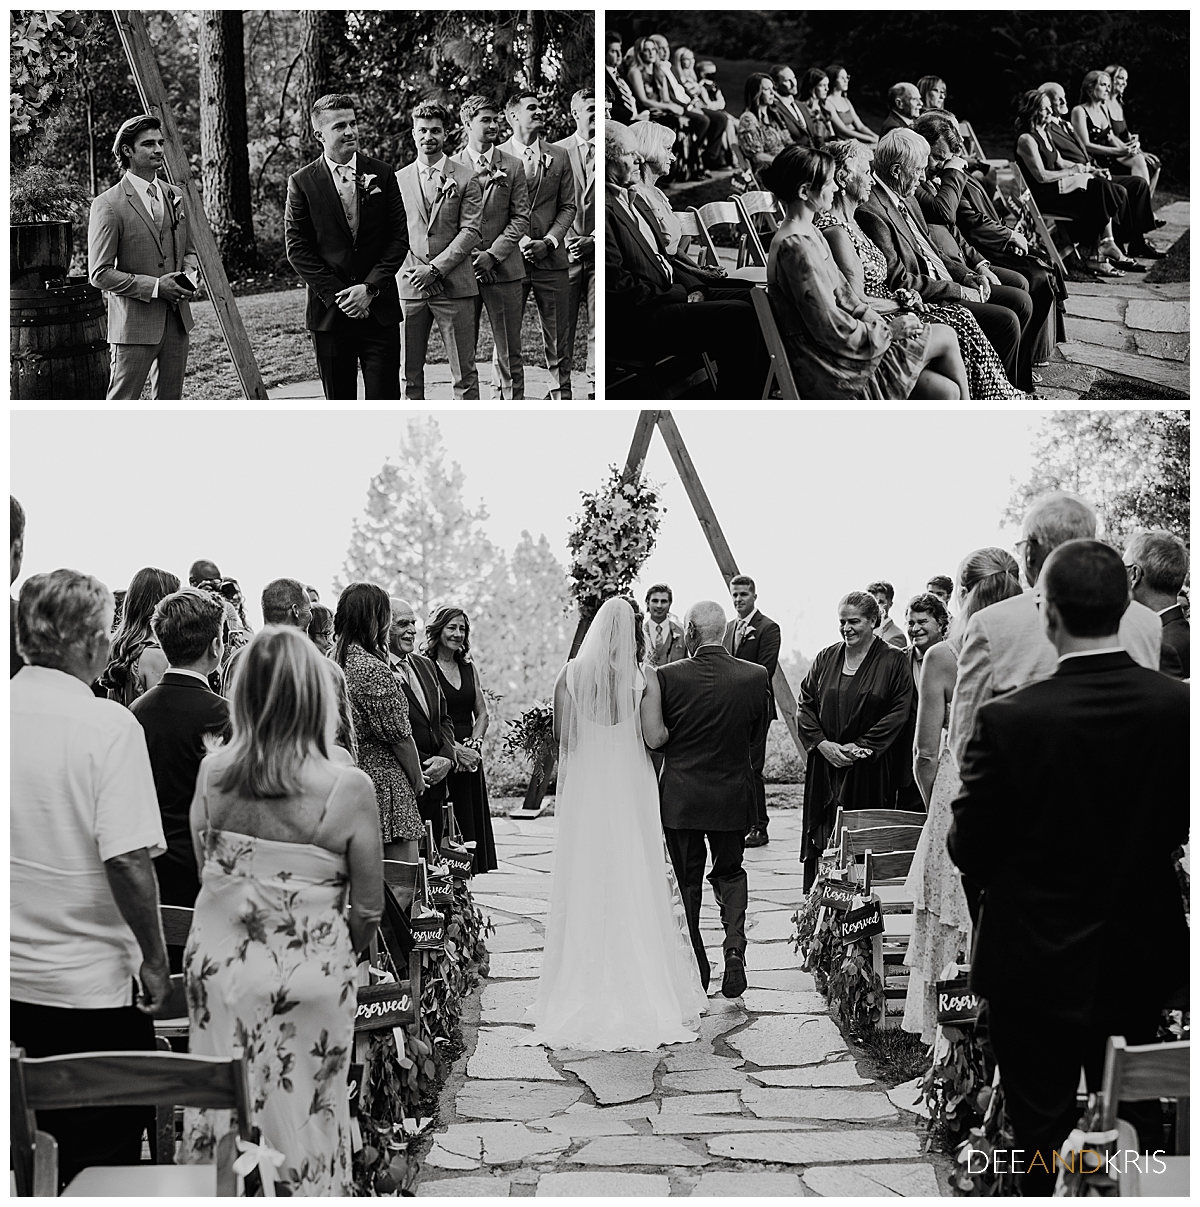 Three black and white images of ceremony.